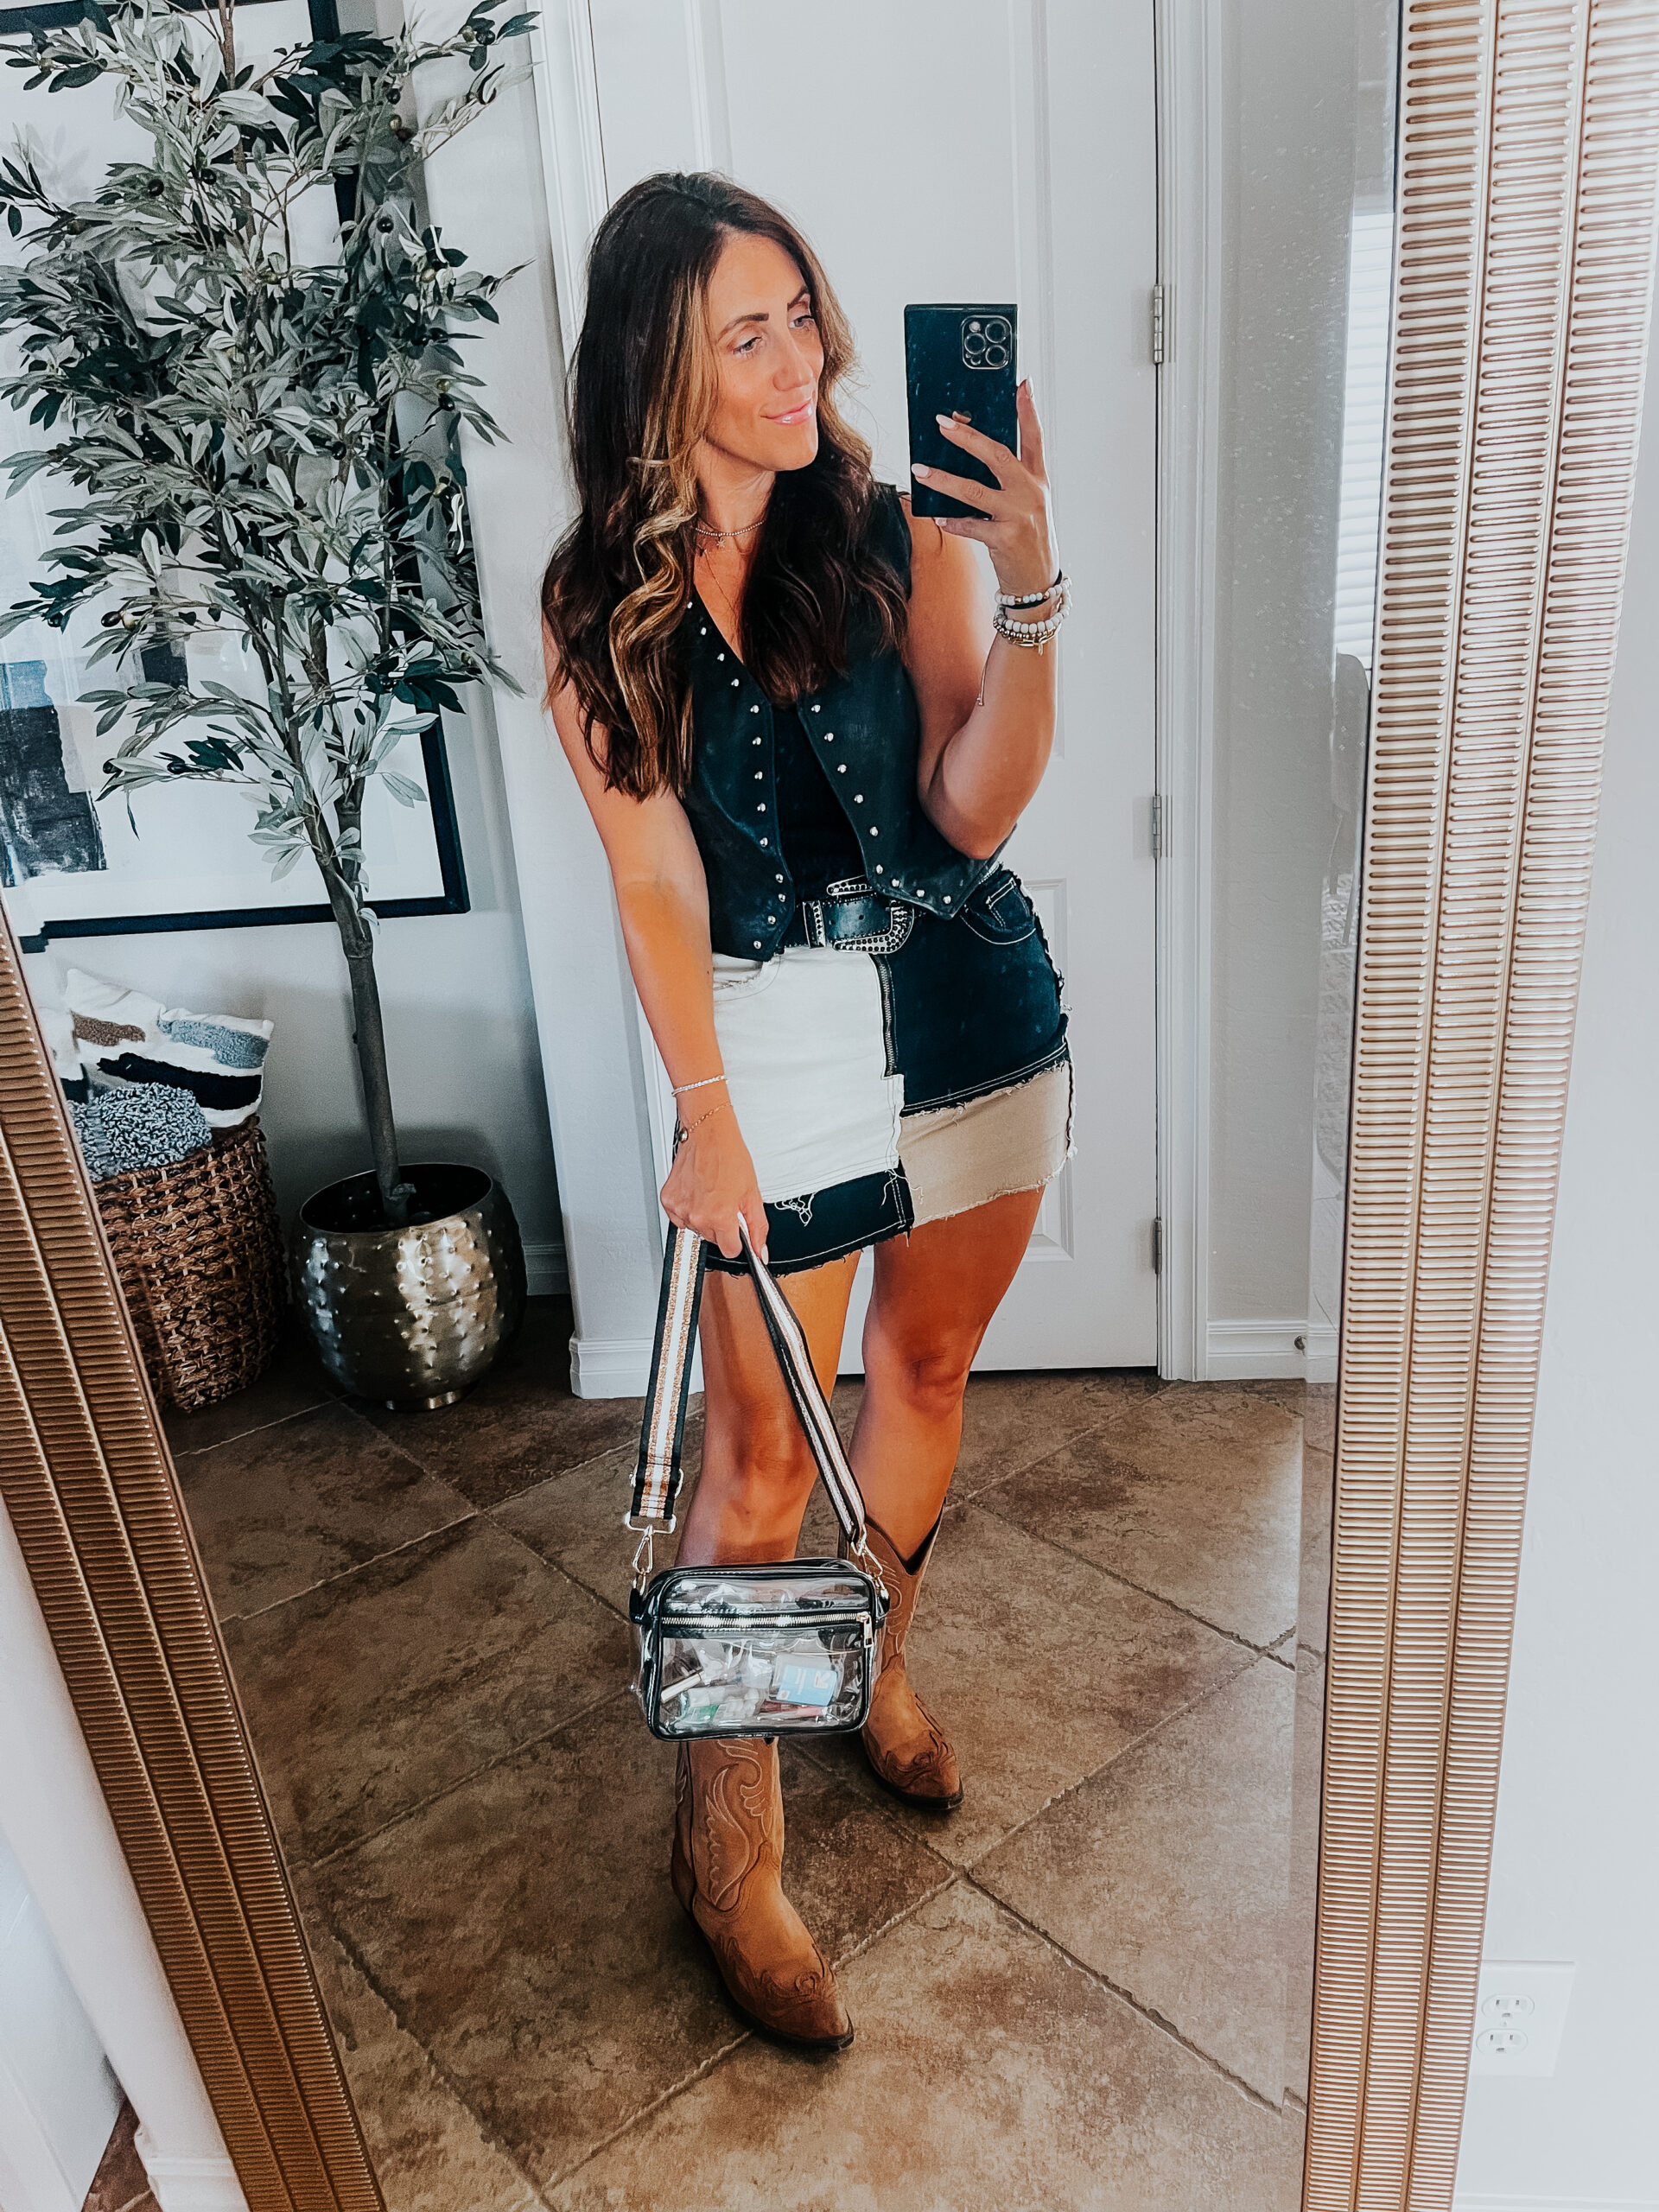 What to Wear to Morgan Wallen concert - What I wore to a morgan Wallen concert - #countryconcert #moganwallenoutfit